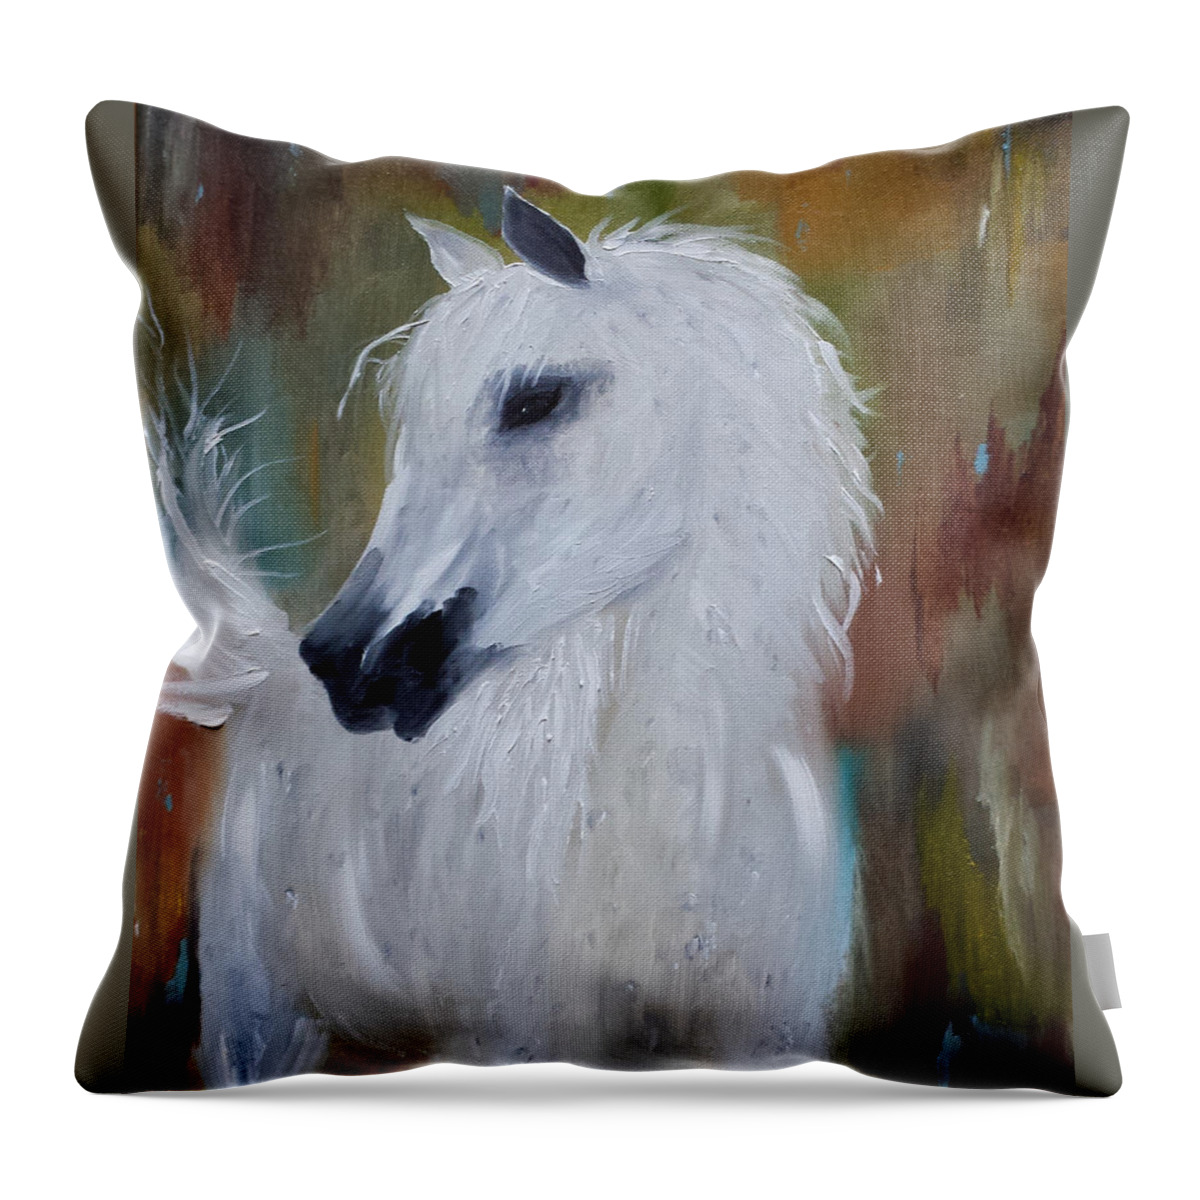 Arabian Throw Pillow featuring the painting Arabian Marble by Judith Rhue